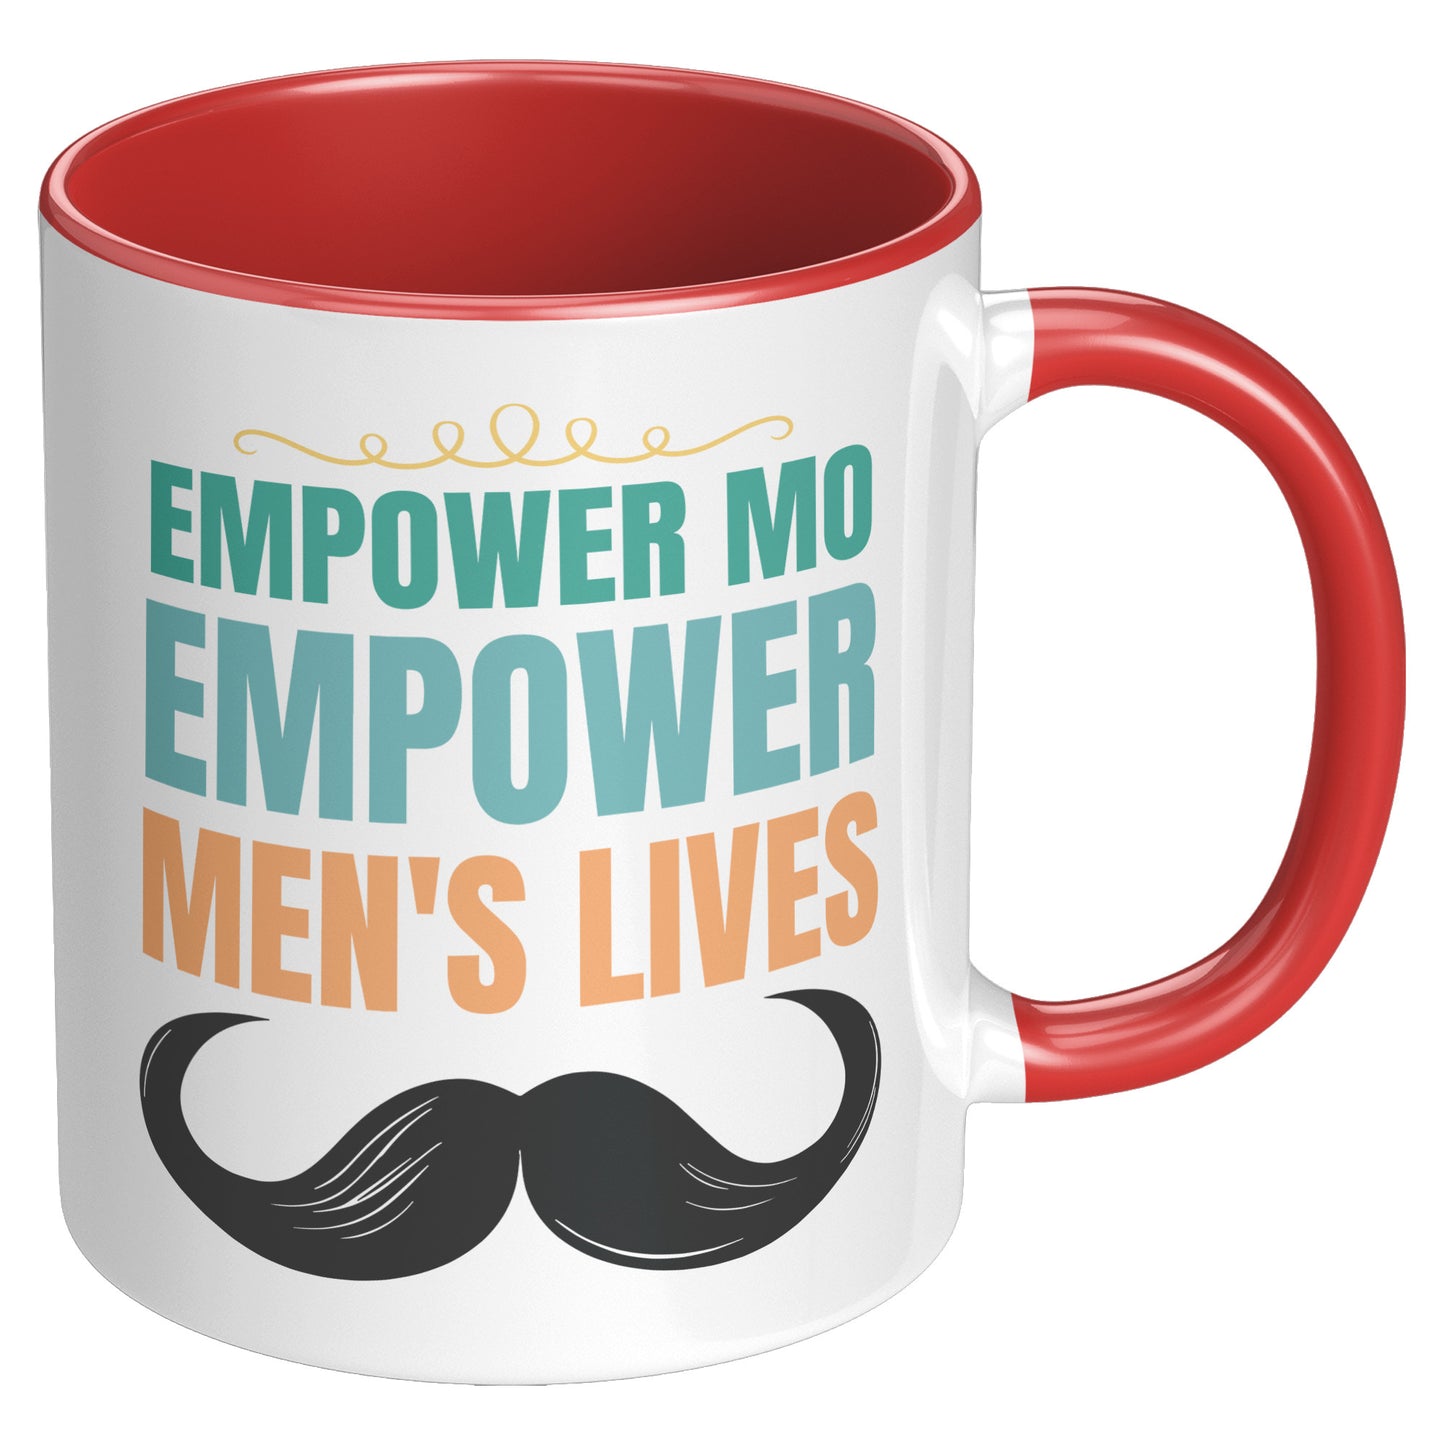 11oz Accent Mug Movember EMPOWER MO EMPOWER MEND"S LIVES Right-handed